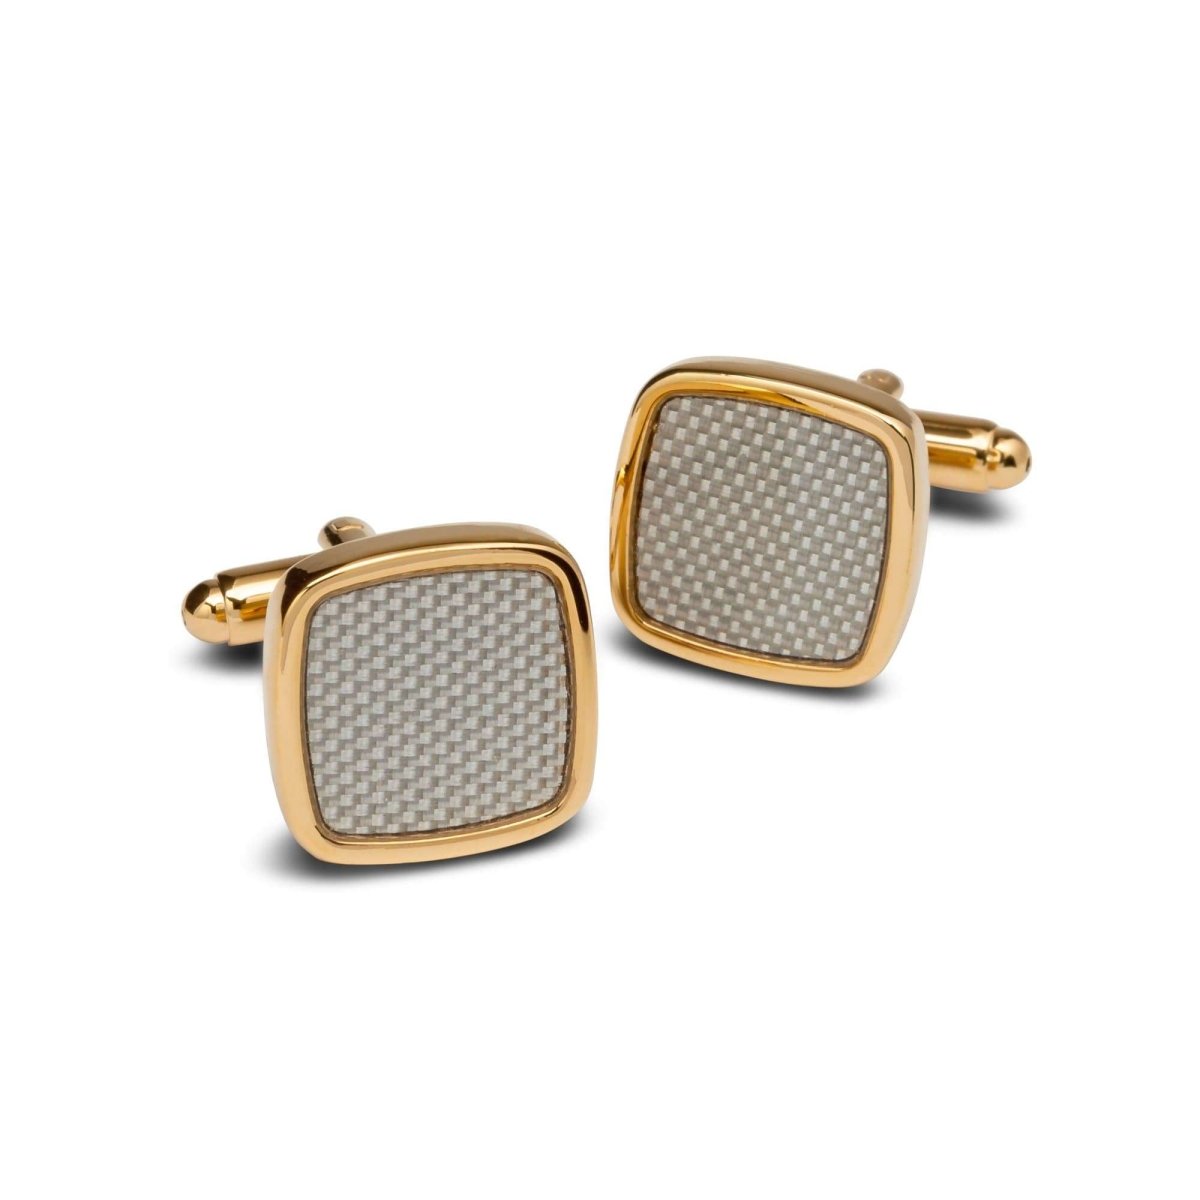 Textured Silver Gold Edged Square Cufflinks - MenSuits